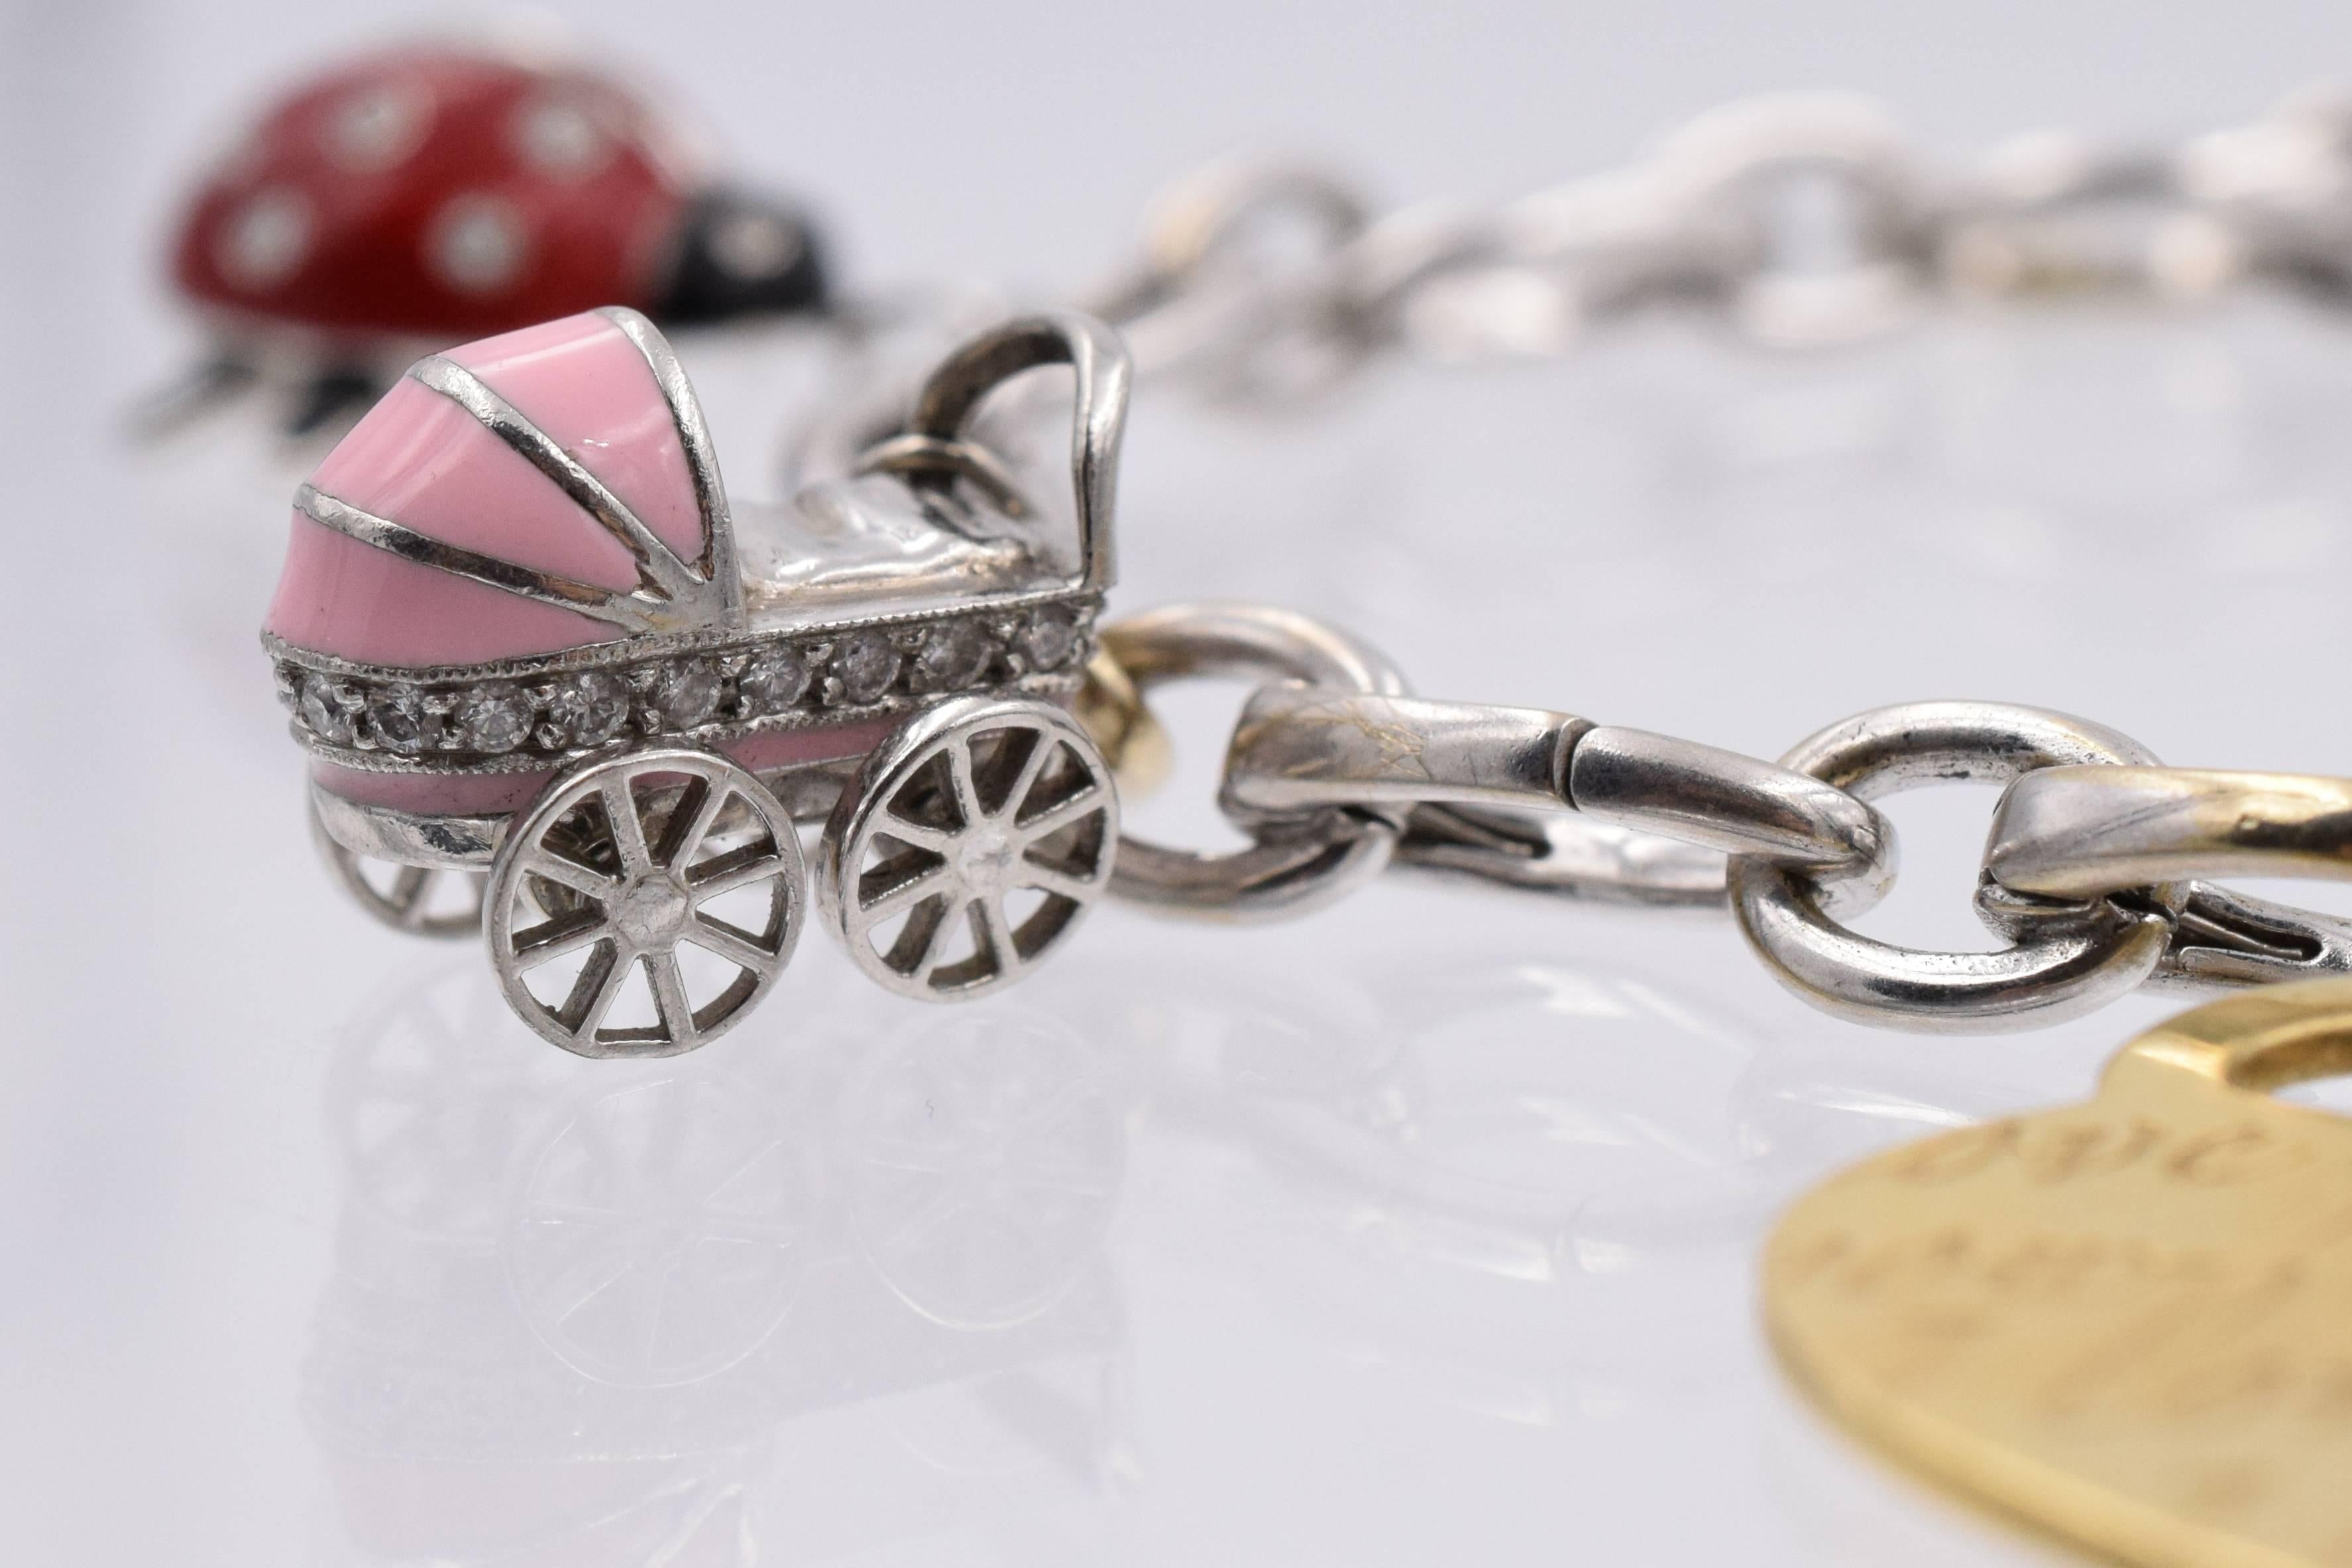 Tiffany & Co   wimsical 18k white gold charm bracelet with 5 charms
Lady bug is  platinum & red enamel with diamonds
Baby carriage platinum &  pink enamel with diamonds
Ginger bread man is silver with teal enamel
 Heart is 18k gold
Length of